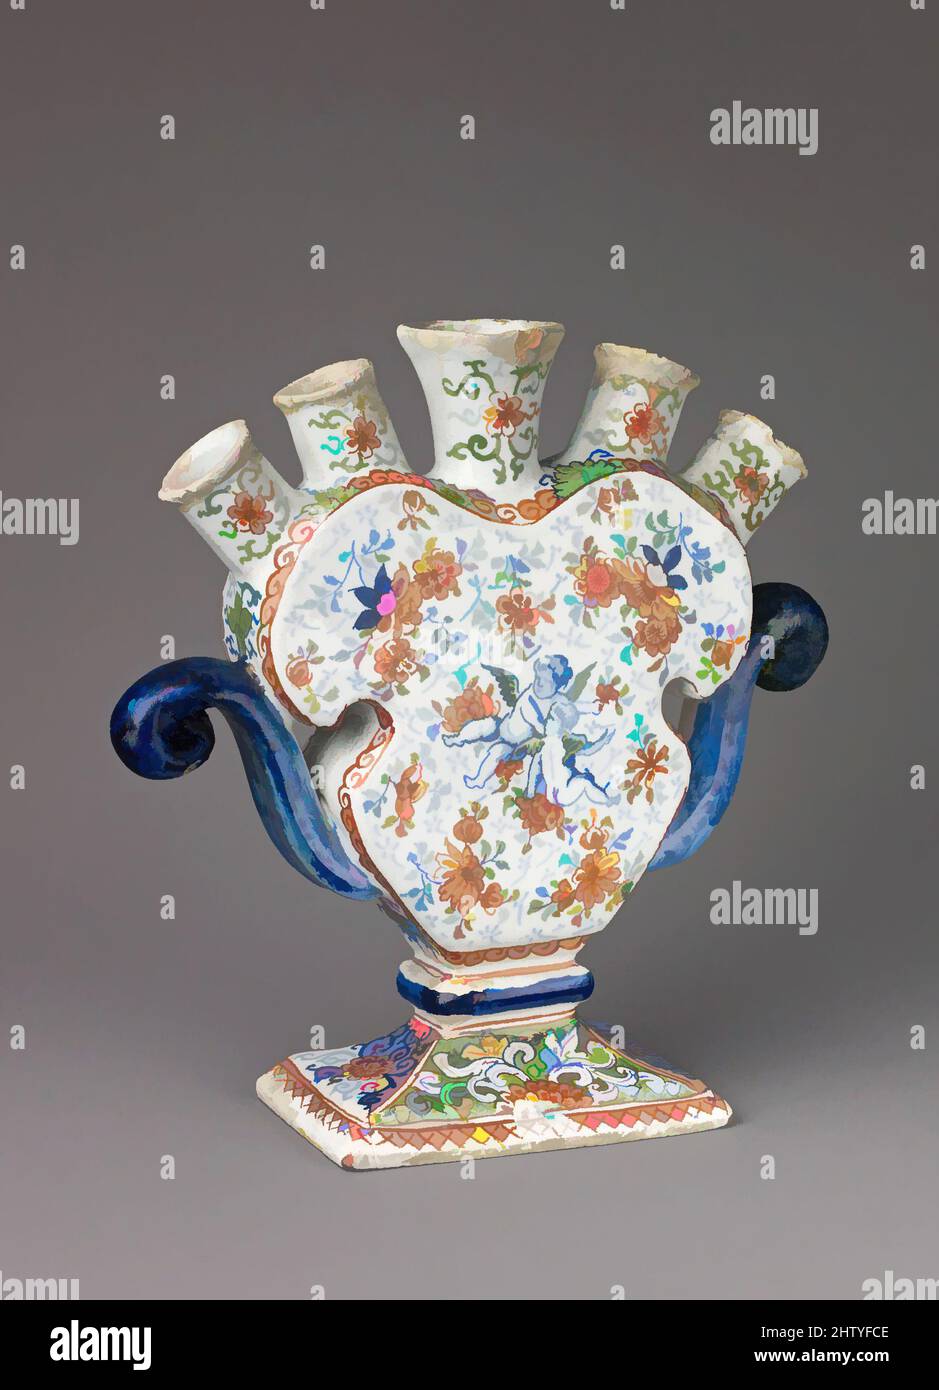 Art inspired by Tulip Vase, ca. 1700–1720, Dutch (Delft), Tin-glazed earthenware, H. 20.6 cm, Ceramics, Classic works modernized by Artotop with a splash of modernity. Shapes, color and value, eye-catching visual impact on art. Emotions through freedom of artworks in a contemporary way. A timeless message pursuing a wildly creative new direction. Artists turning to the digital medium and creating the Artotop NFT Stock Photo